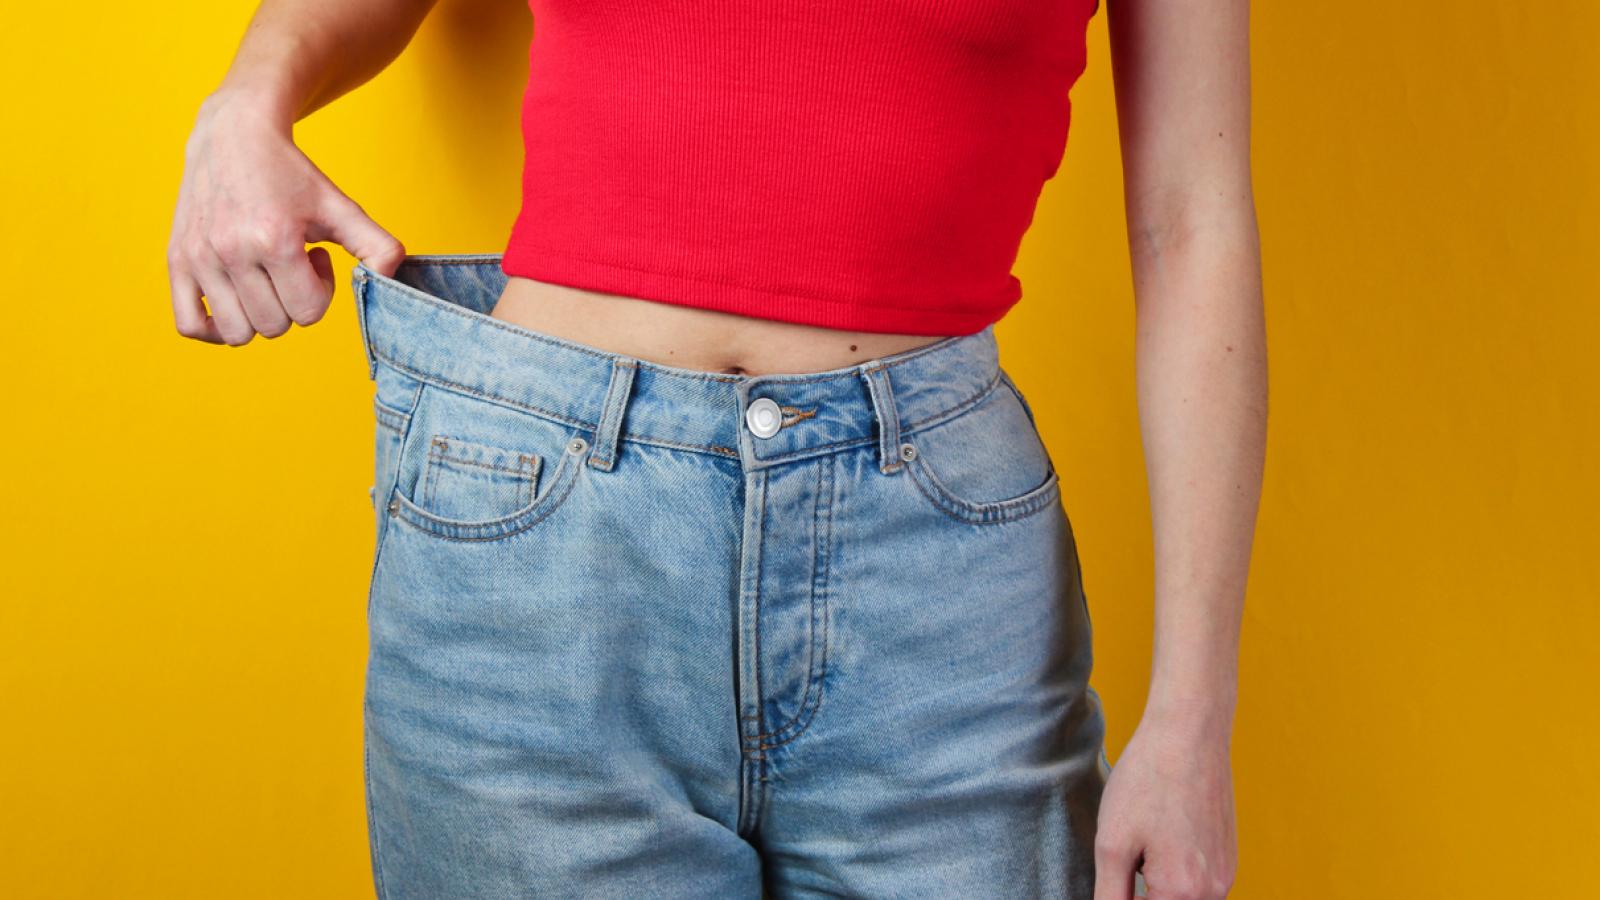 Weight loss - jeans are too big